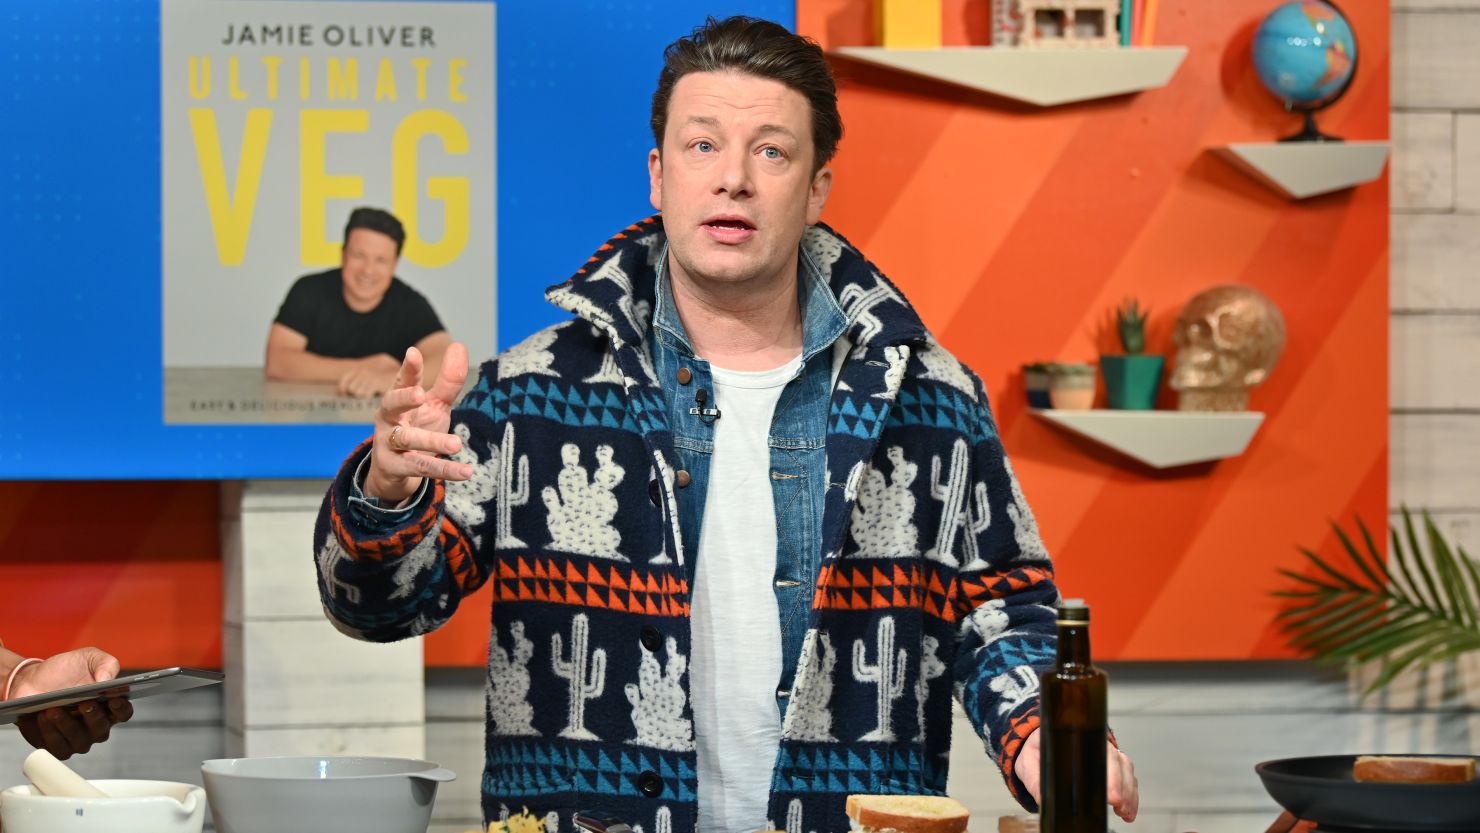 Jamie Oliver visits BuzzFeed's "AM To DM" in New York City on January 9, 2020 to discuss his new book. 